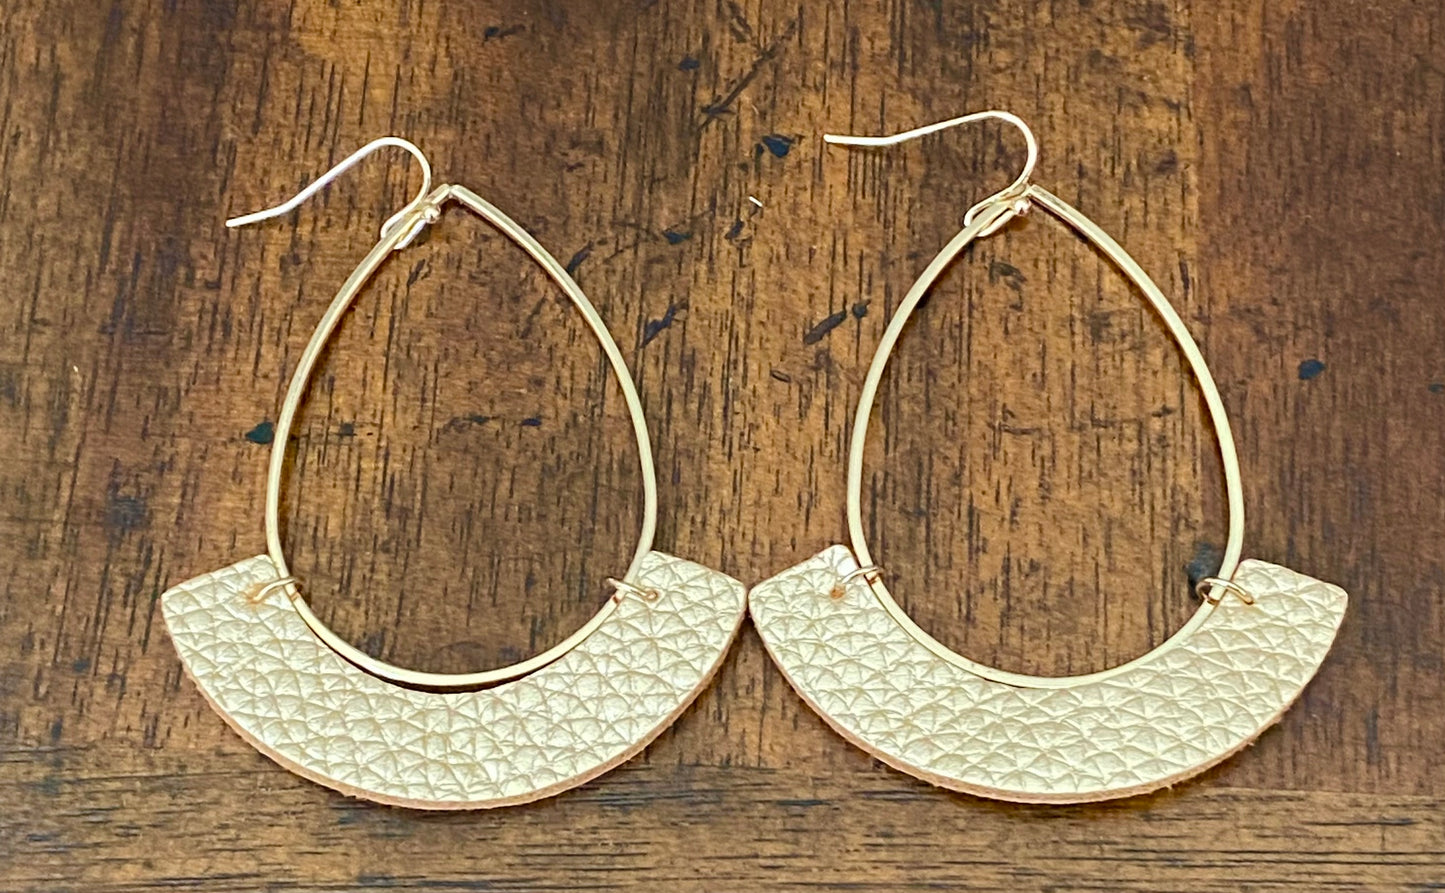 Teardrop Earrings with Faux Leather Accent